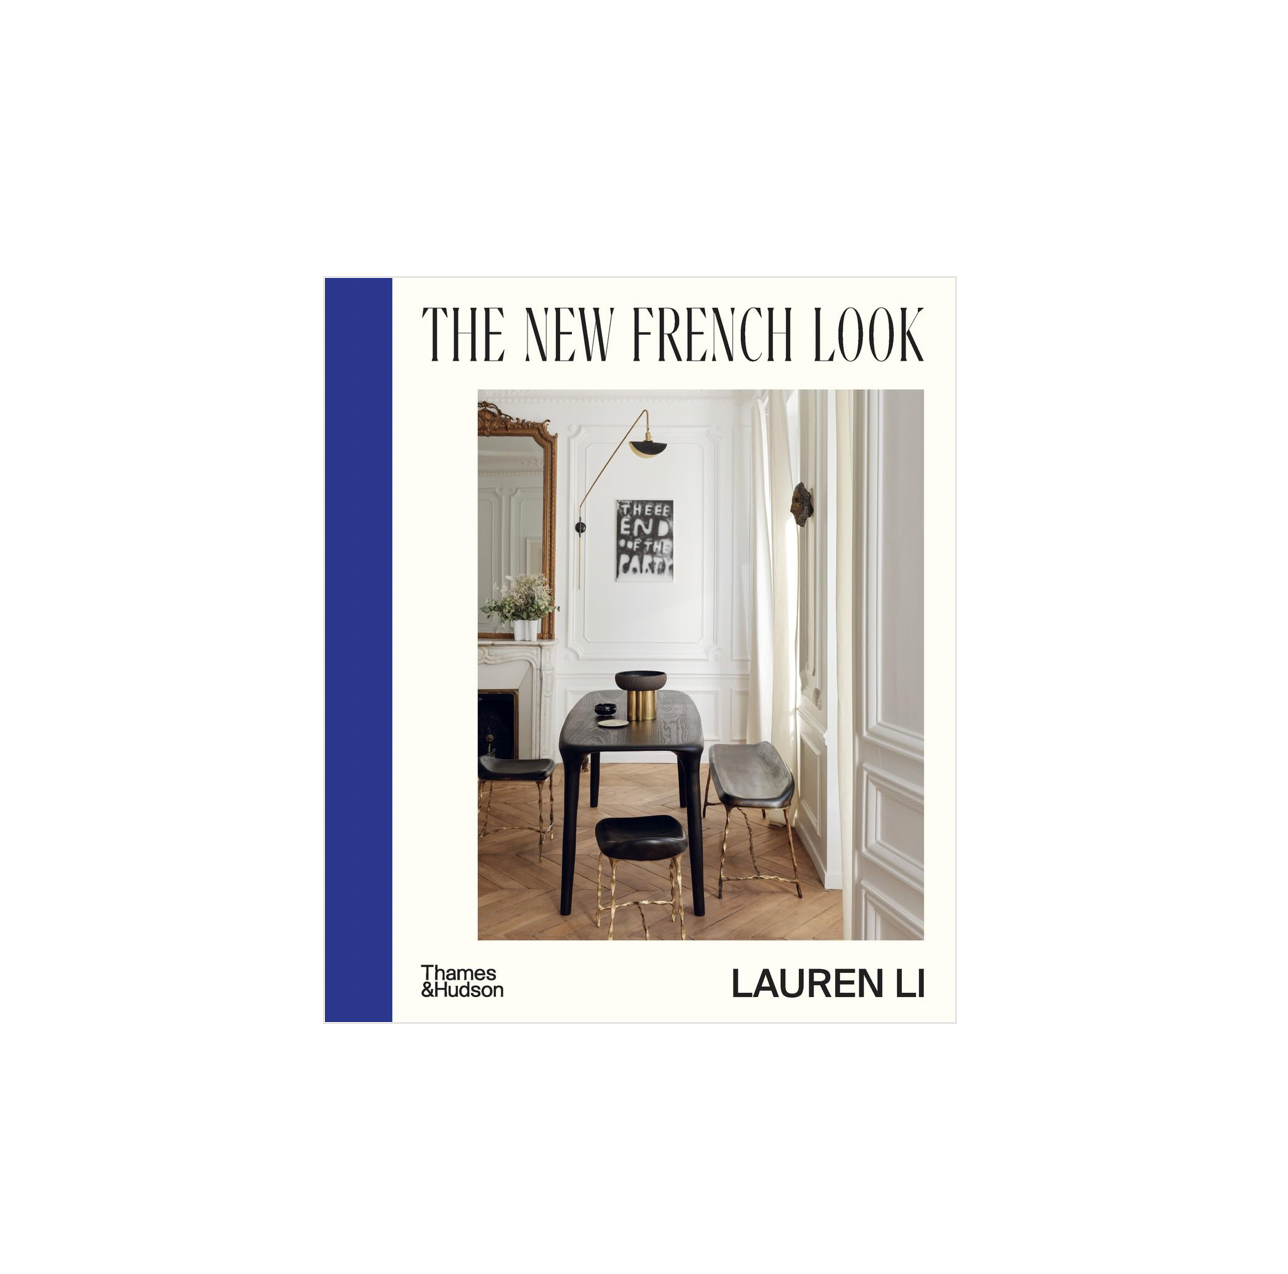 The New French Look by Lauren Li